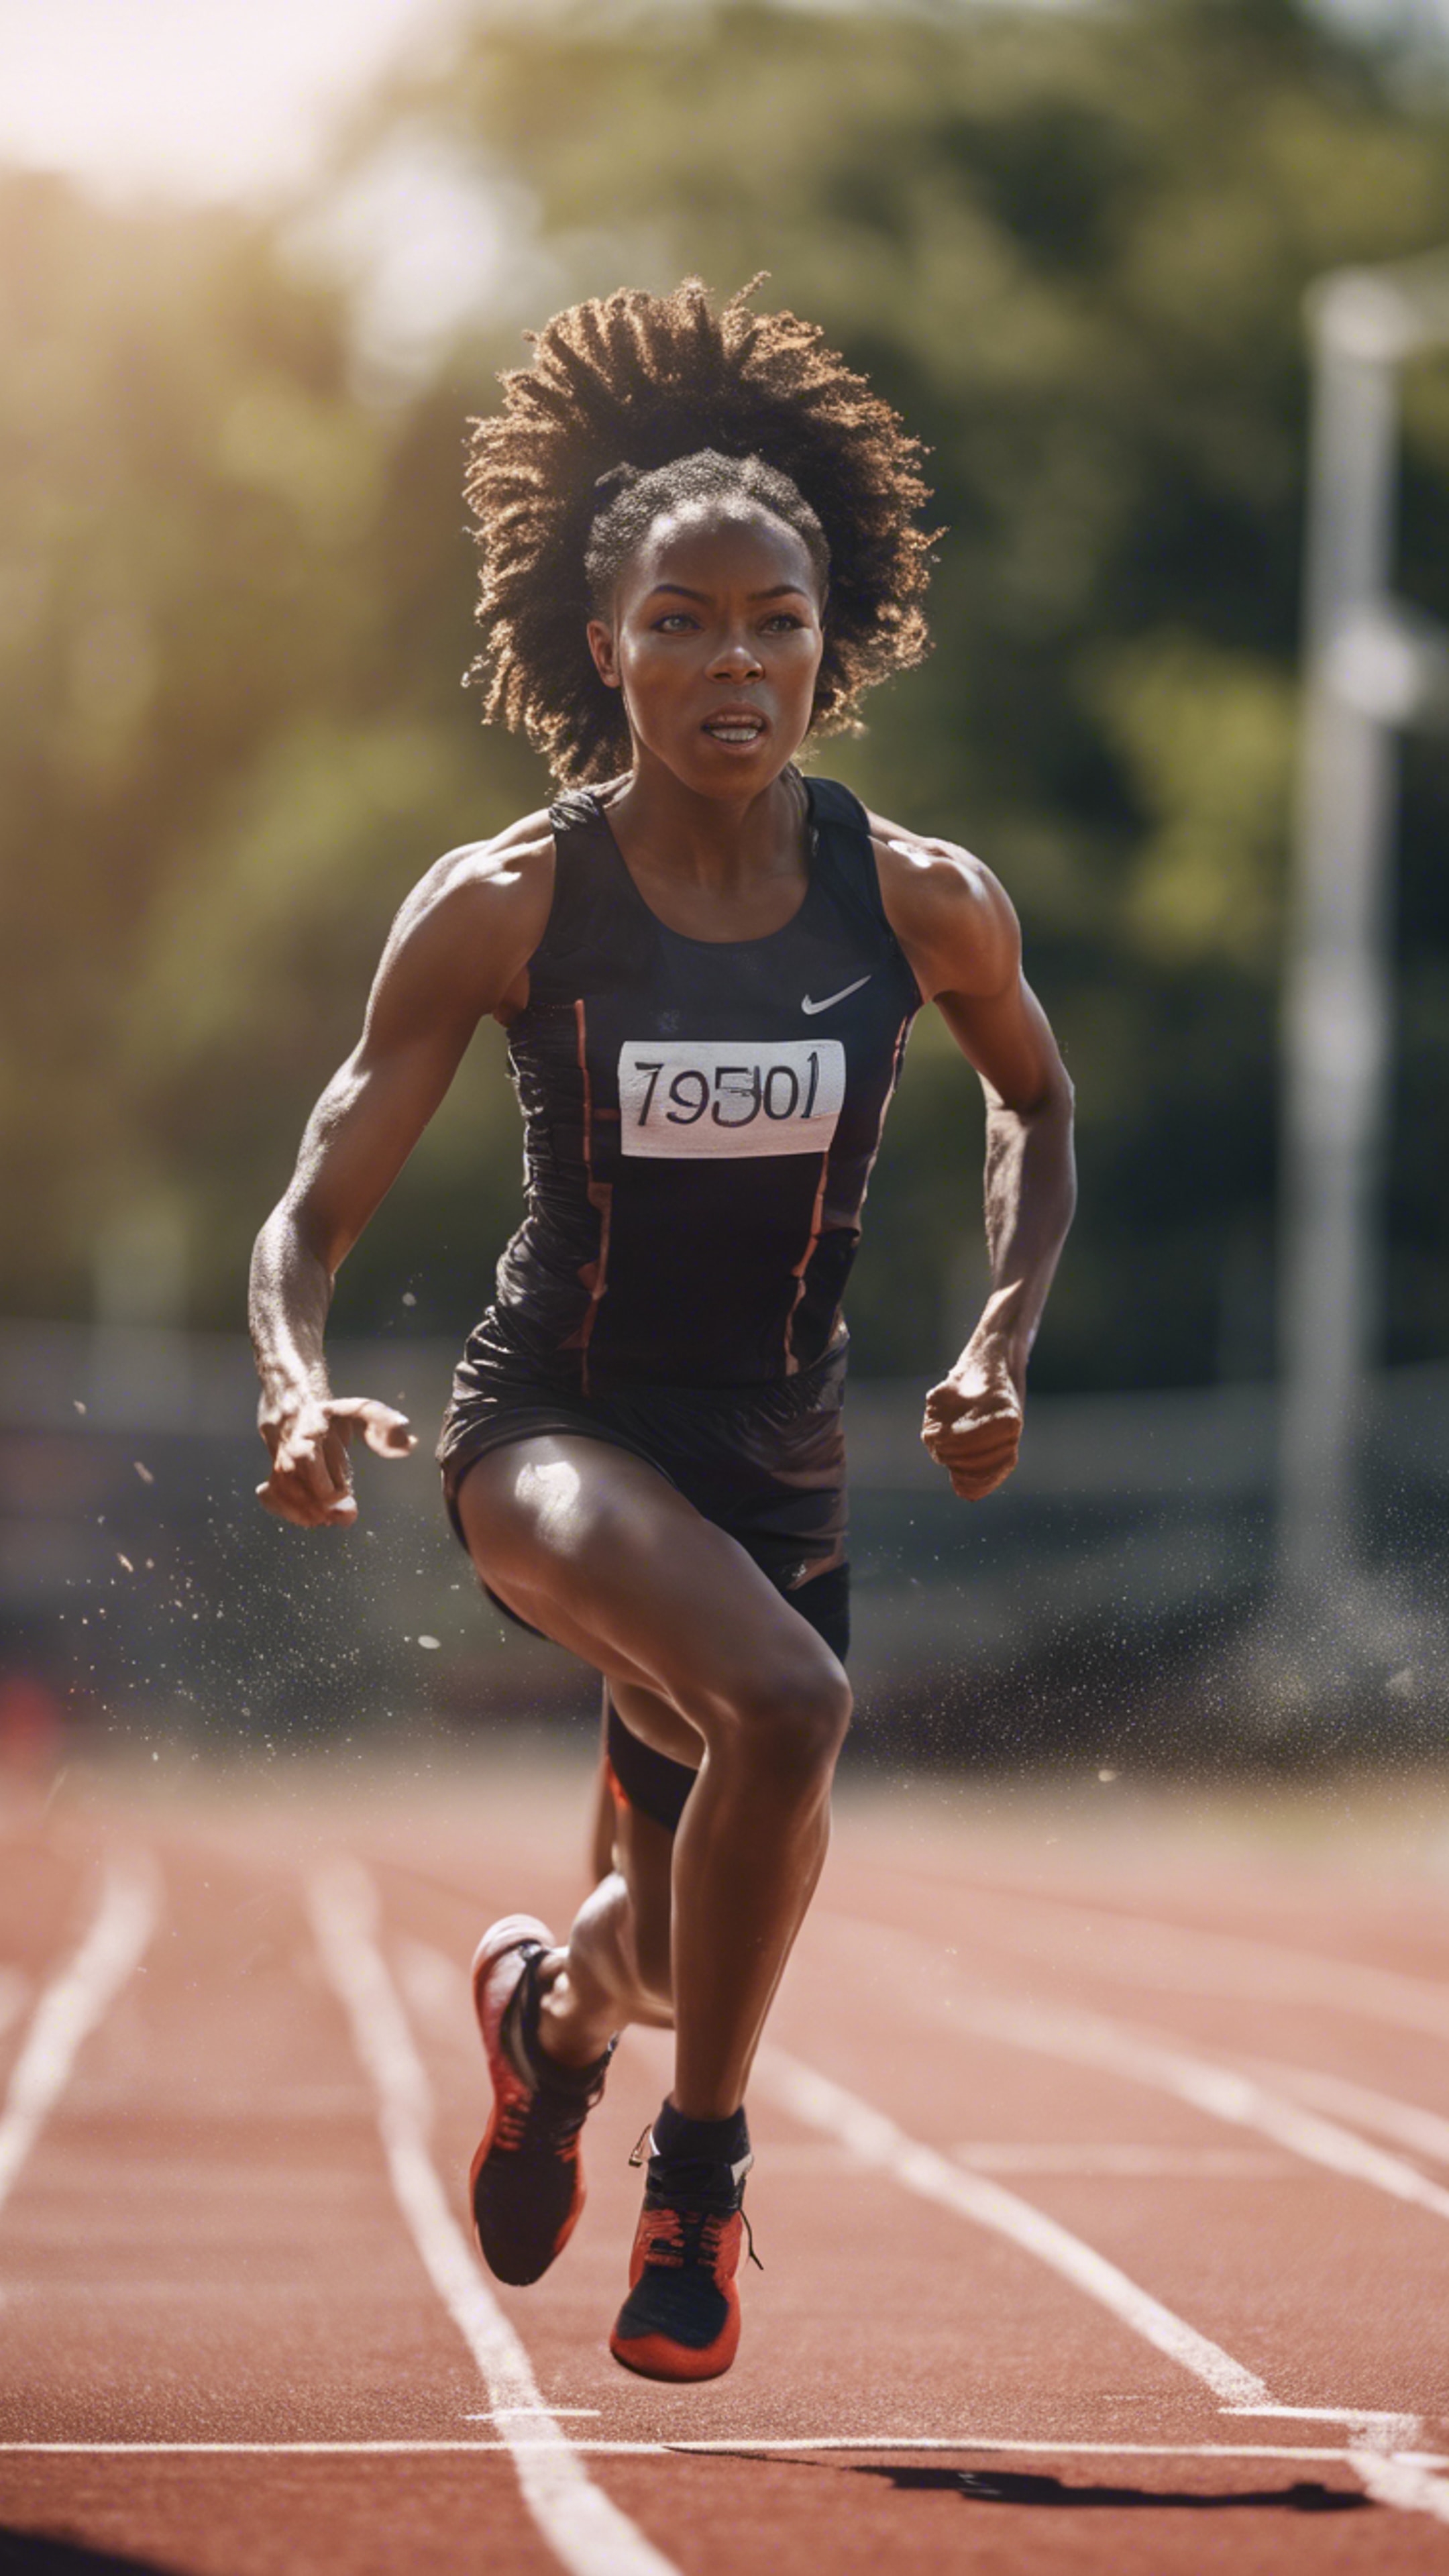 A dynamic image of a black girl engaging in competitive sprint, showing her vital energy.壁紙[76eb5b44f4a84b498fc2]